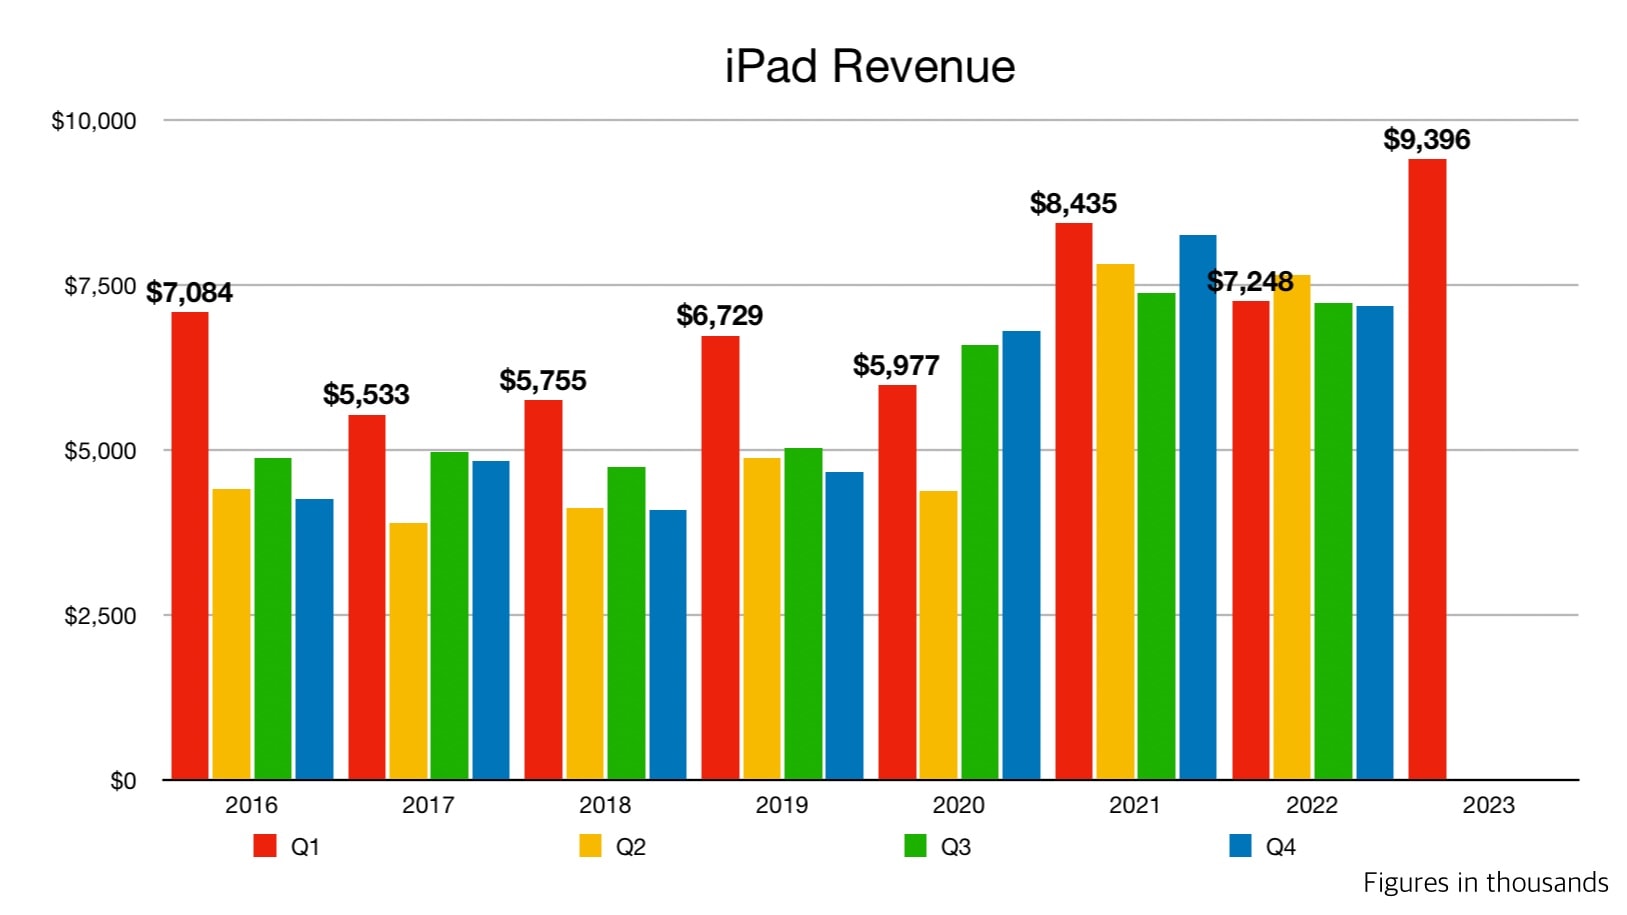 Quarterly iPad Revenue from 2016 to 2023